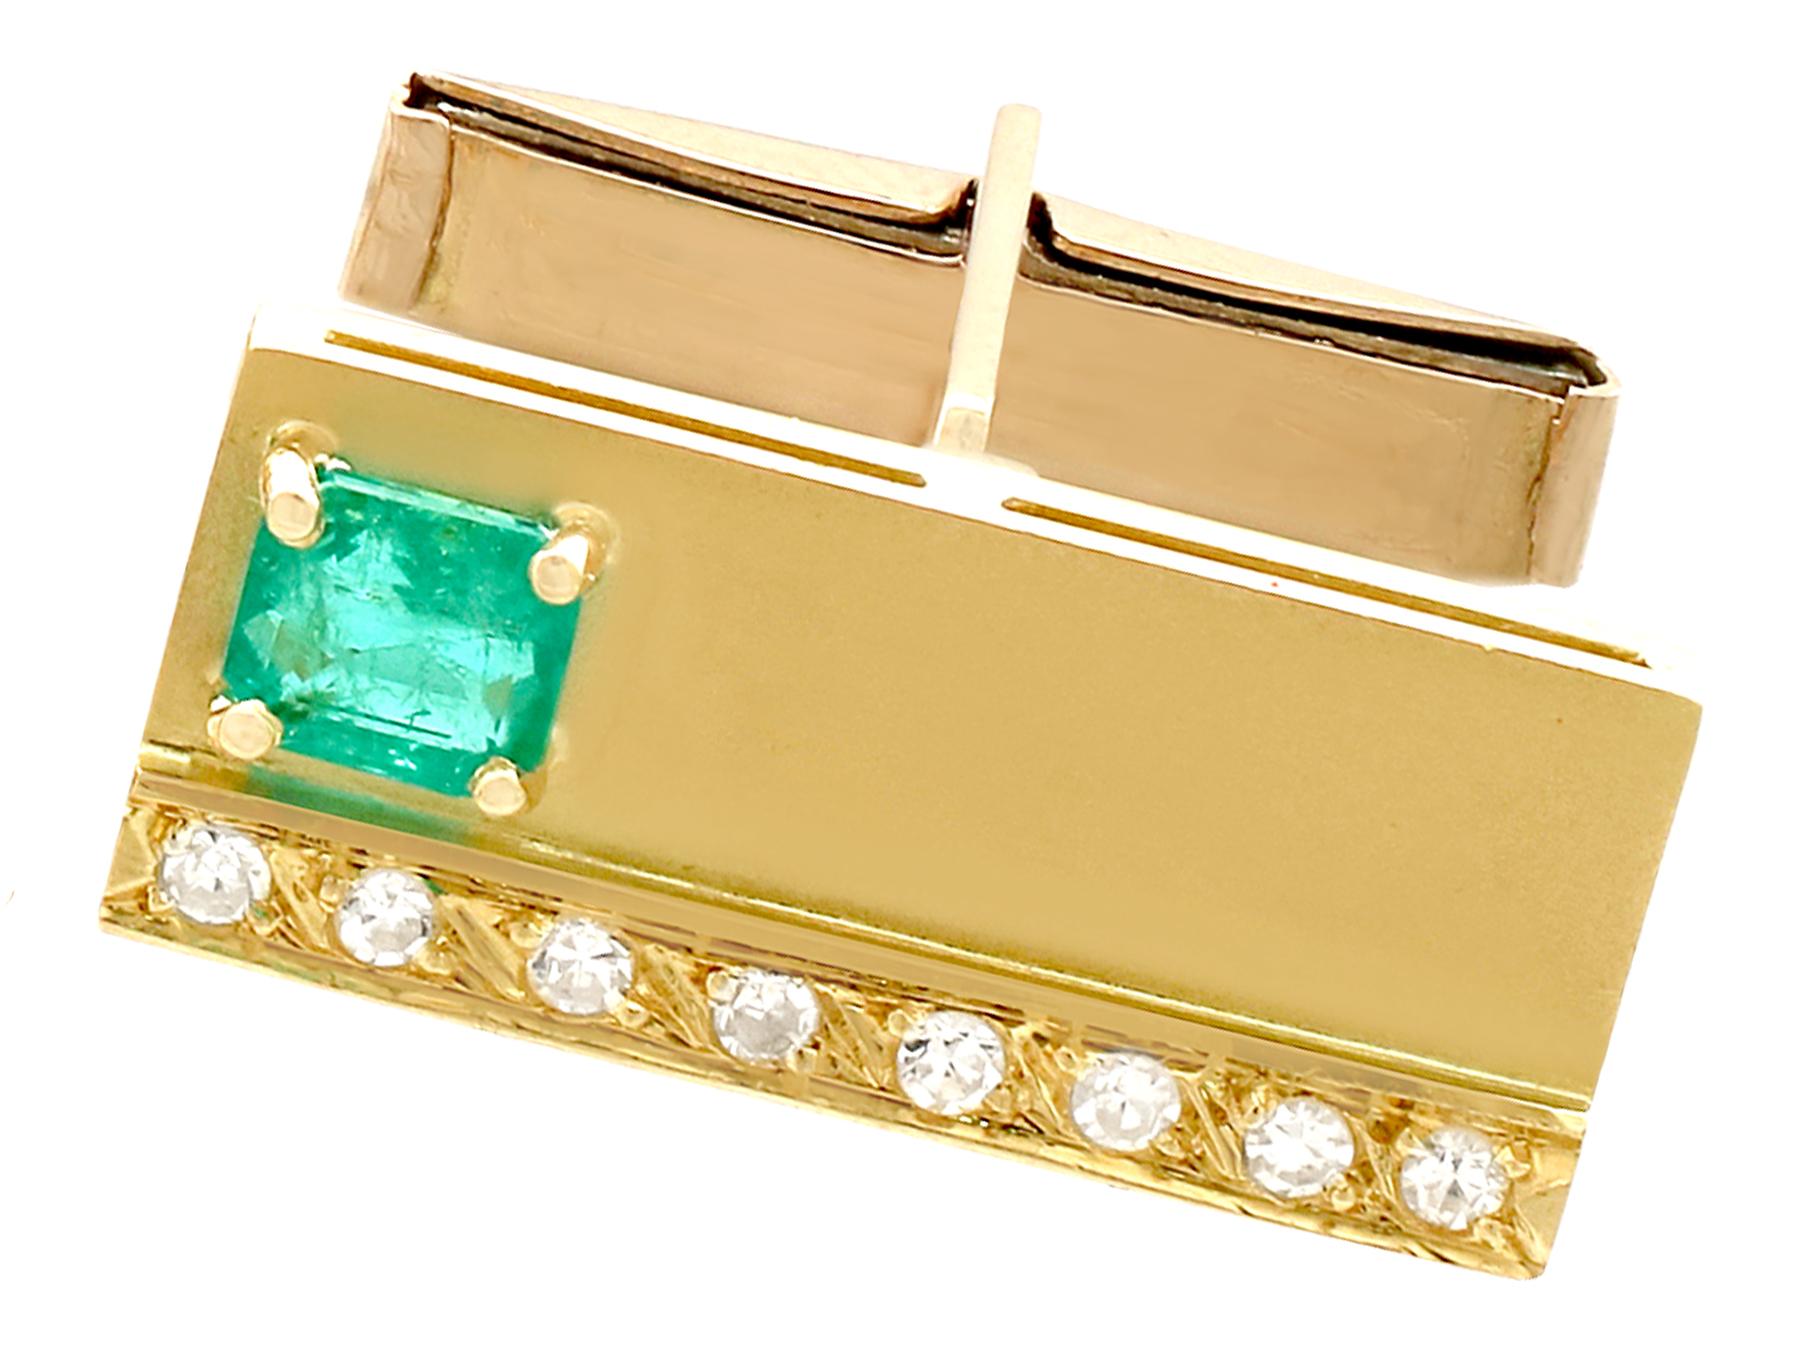 An impressive pair of vintage 0.90 carat emerald, 0.36 carat diamond and 18 karat gold cufflinks; part of our diverse diamond jewelry and estate jewelry collections.

This fine and impressive pair of emerald and diamond cufflinks has been crafted in